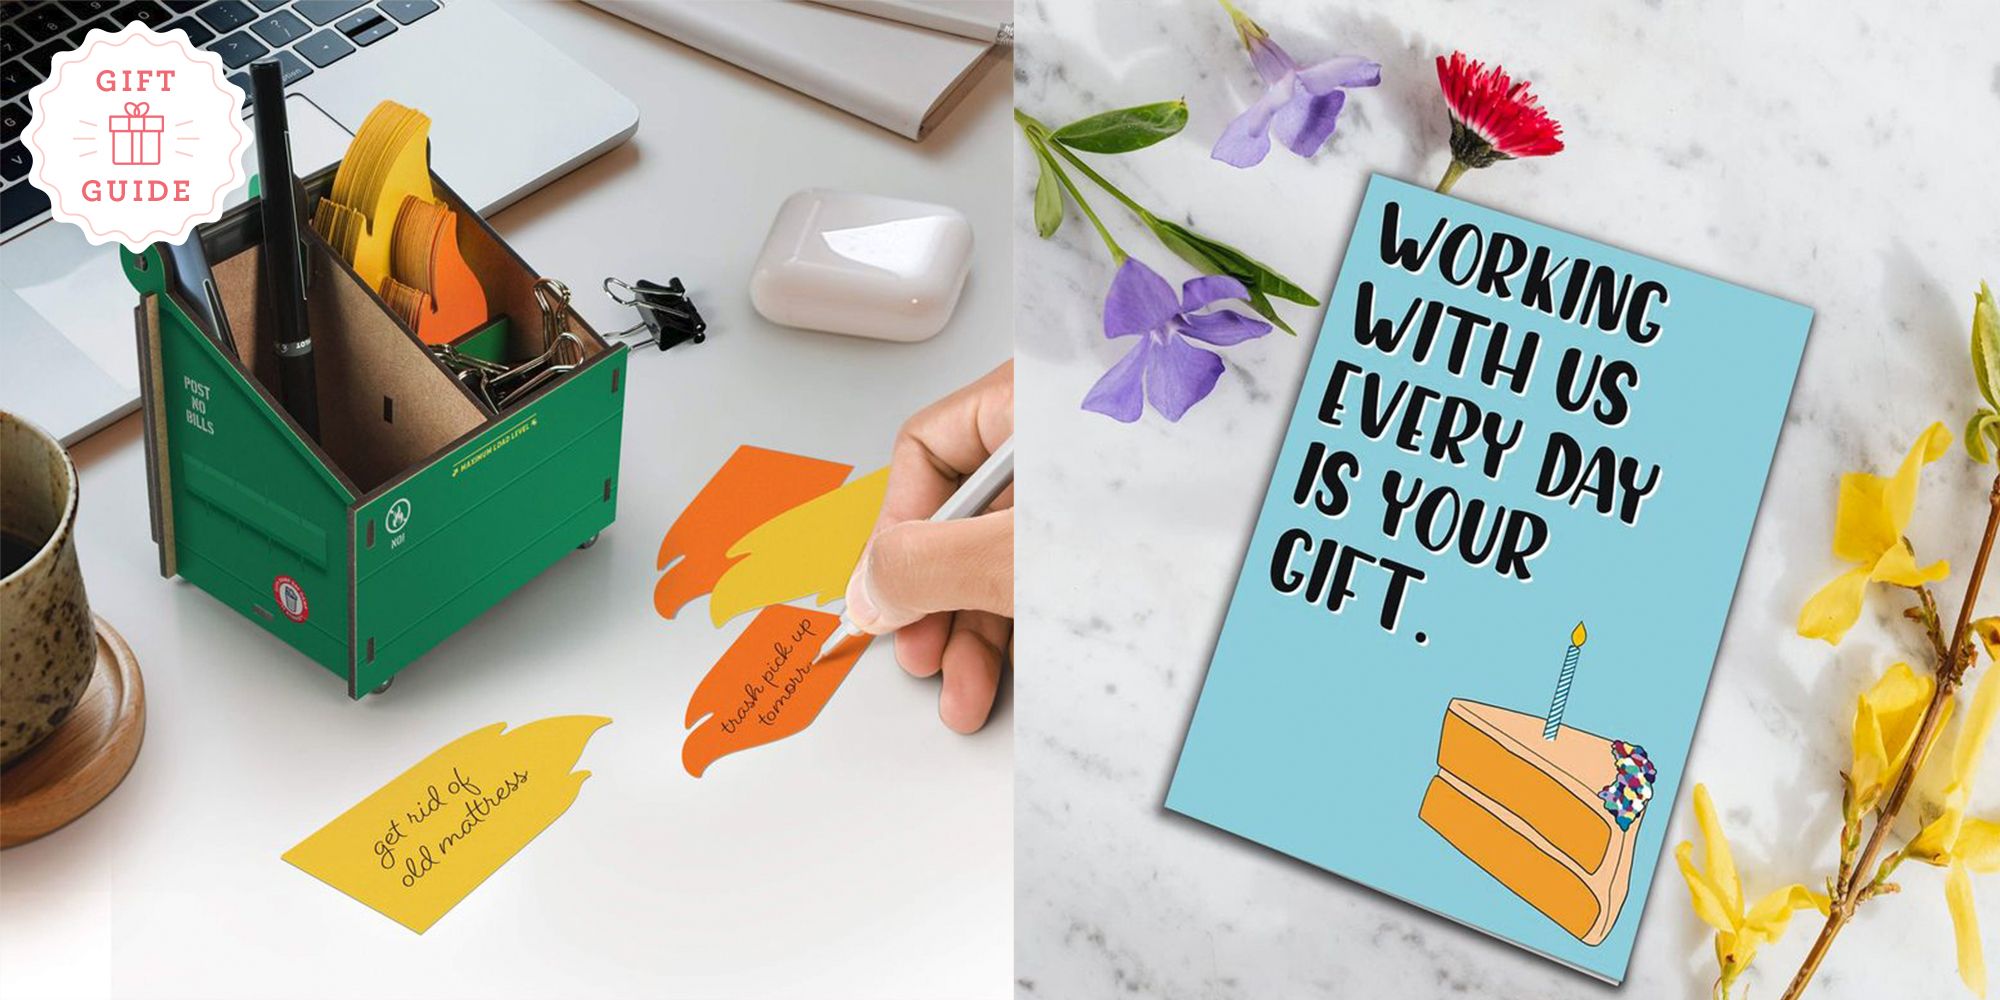 Free, printable farewell card templates to personalize online | Canva